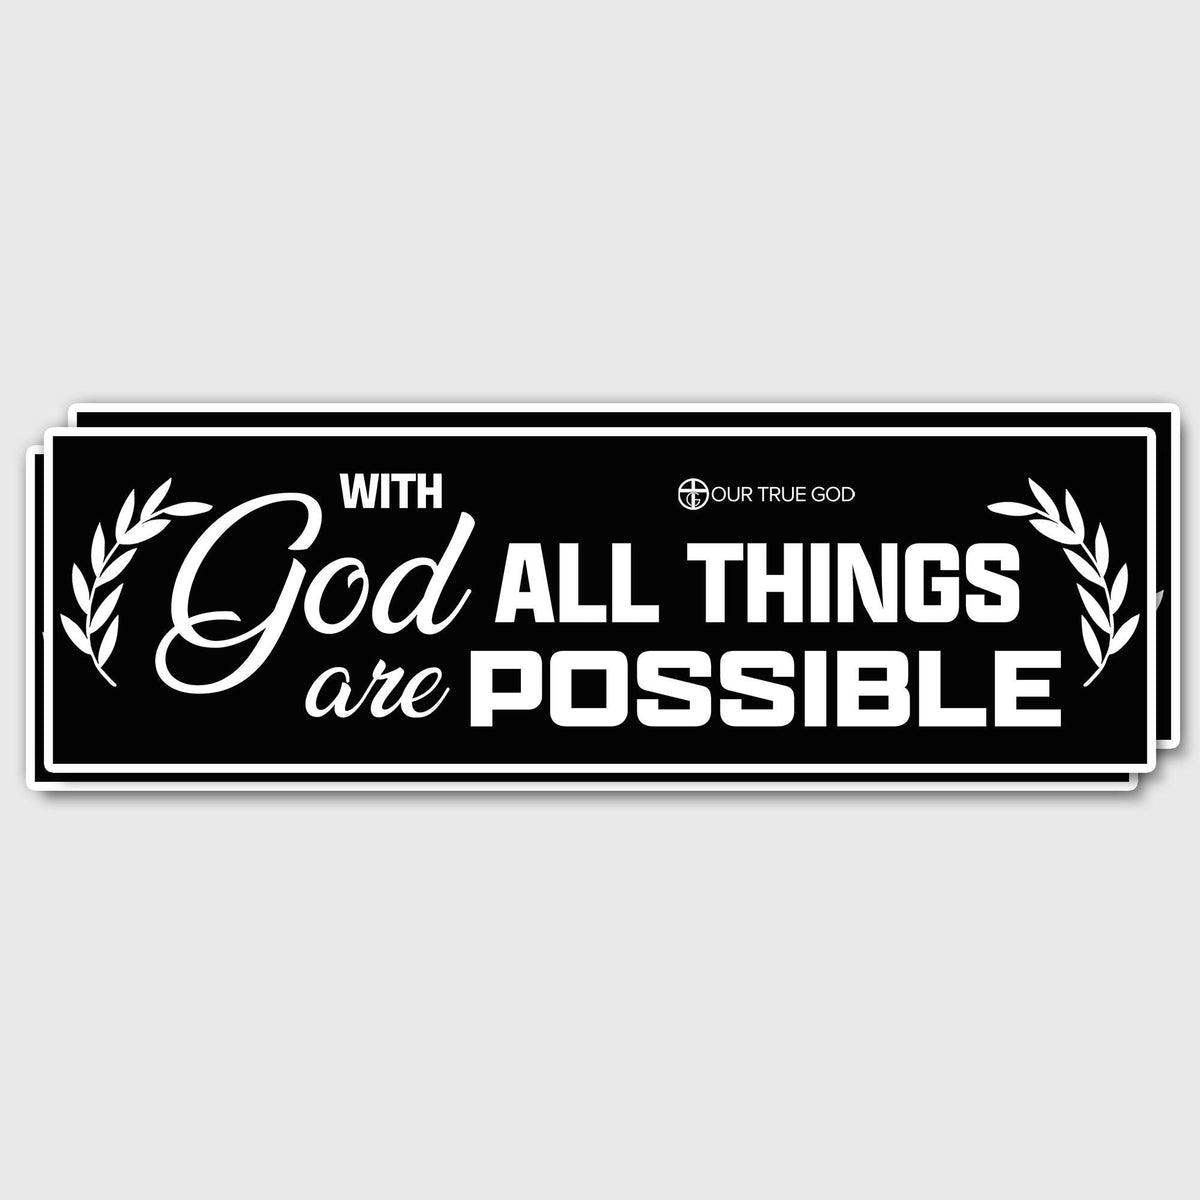 With God All Thing Are Possible Bumper Stickers - Our True God